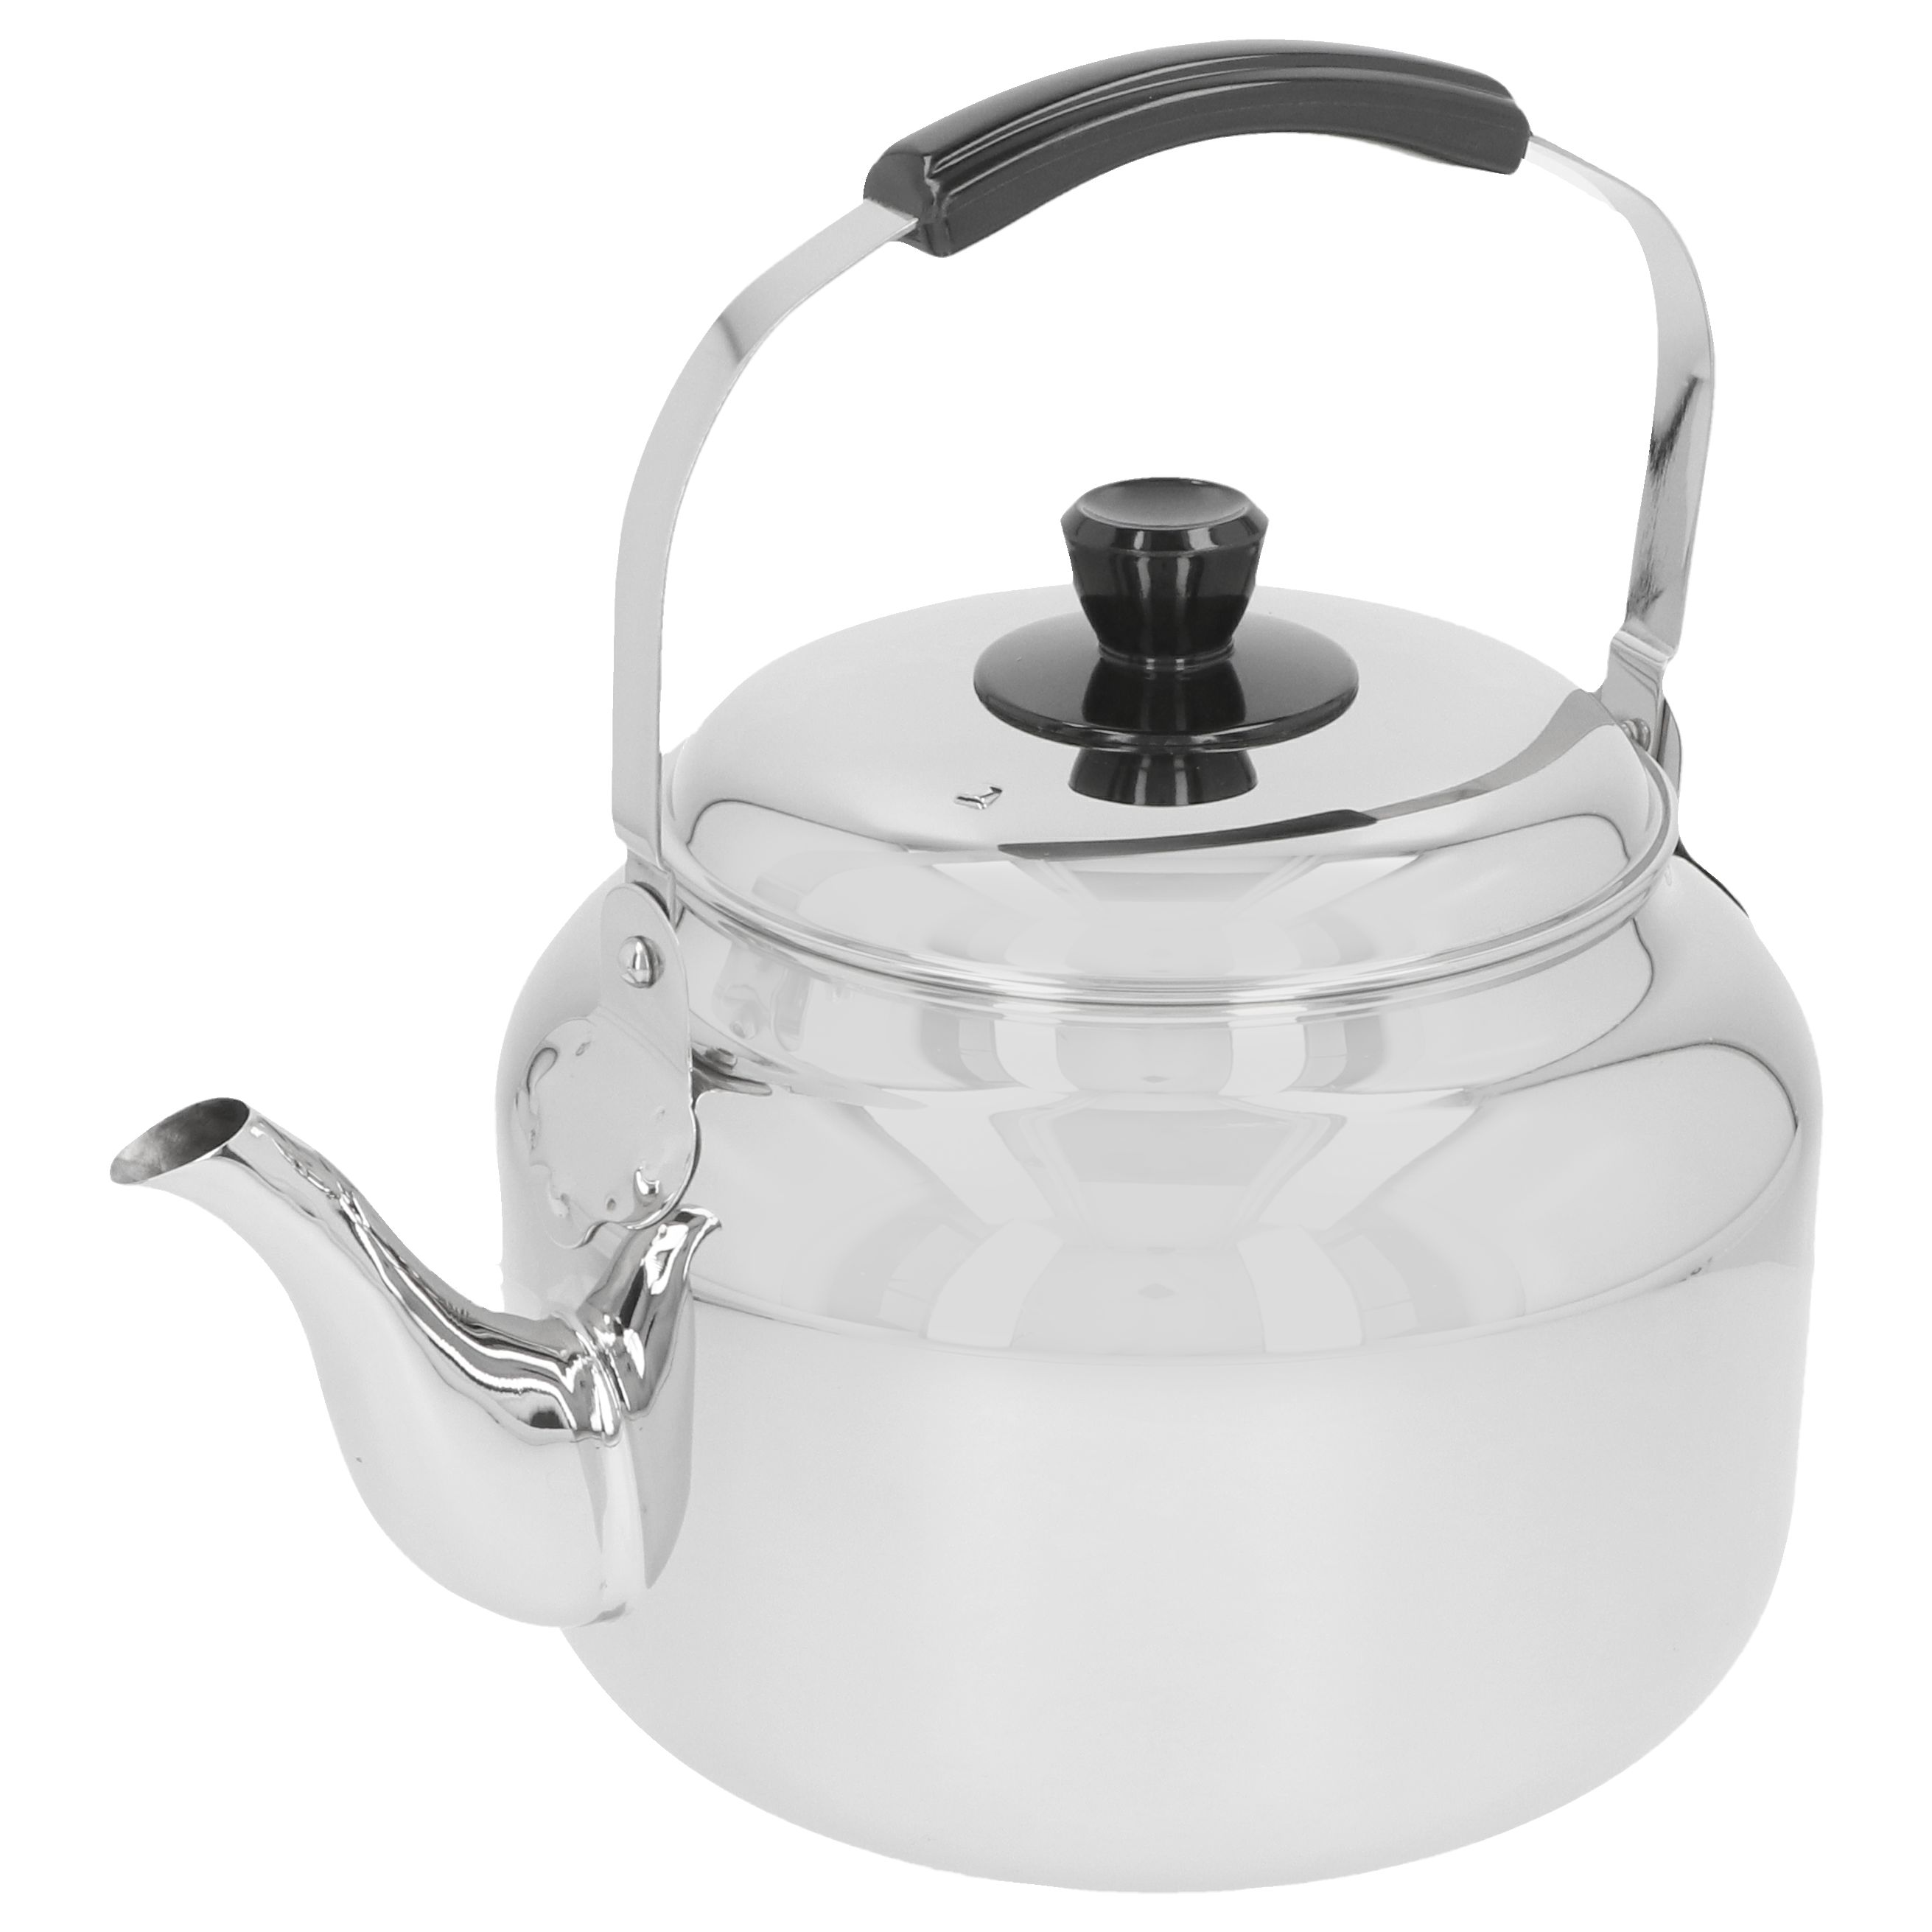 Large Water Bottle, Stainless Steel Water Kettle, Induction Cooker